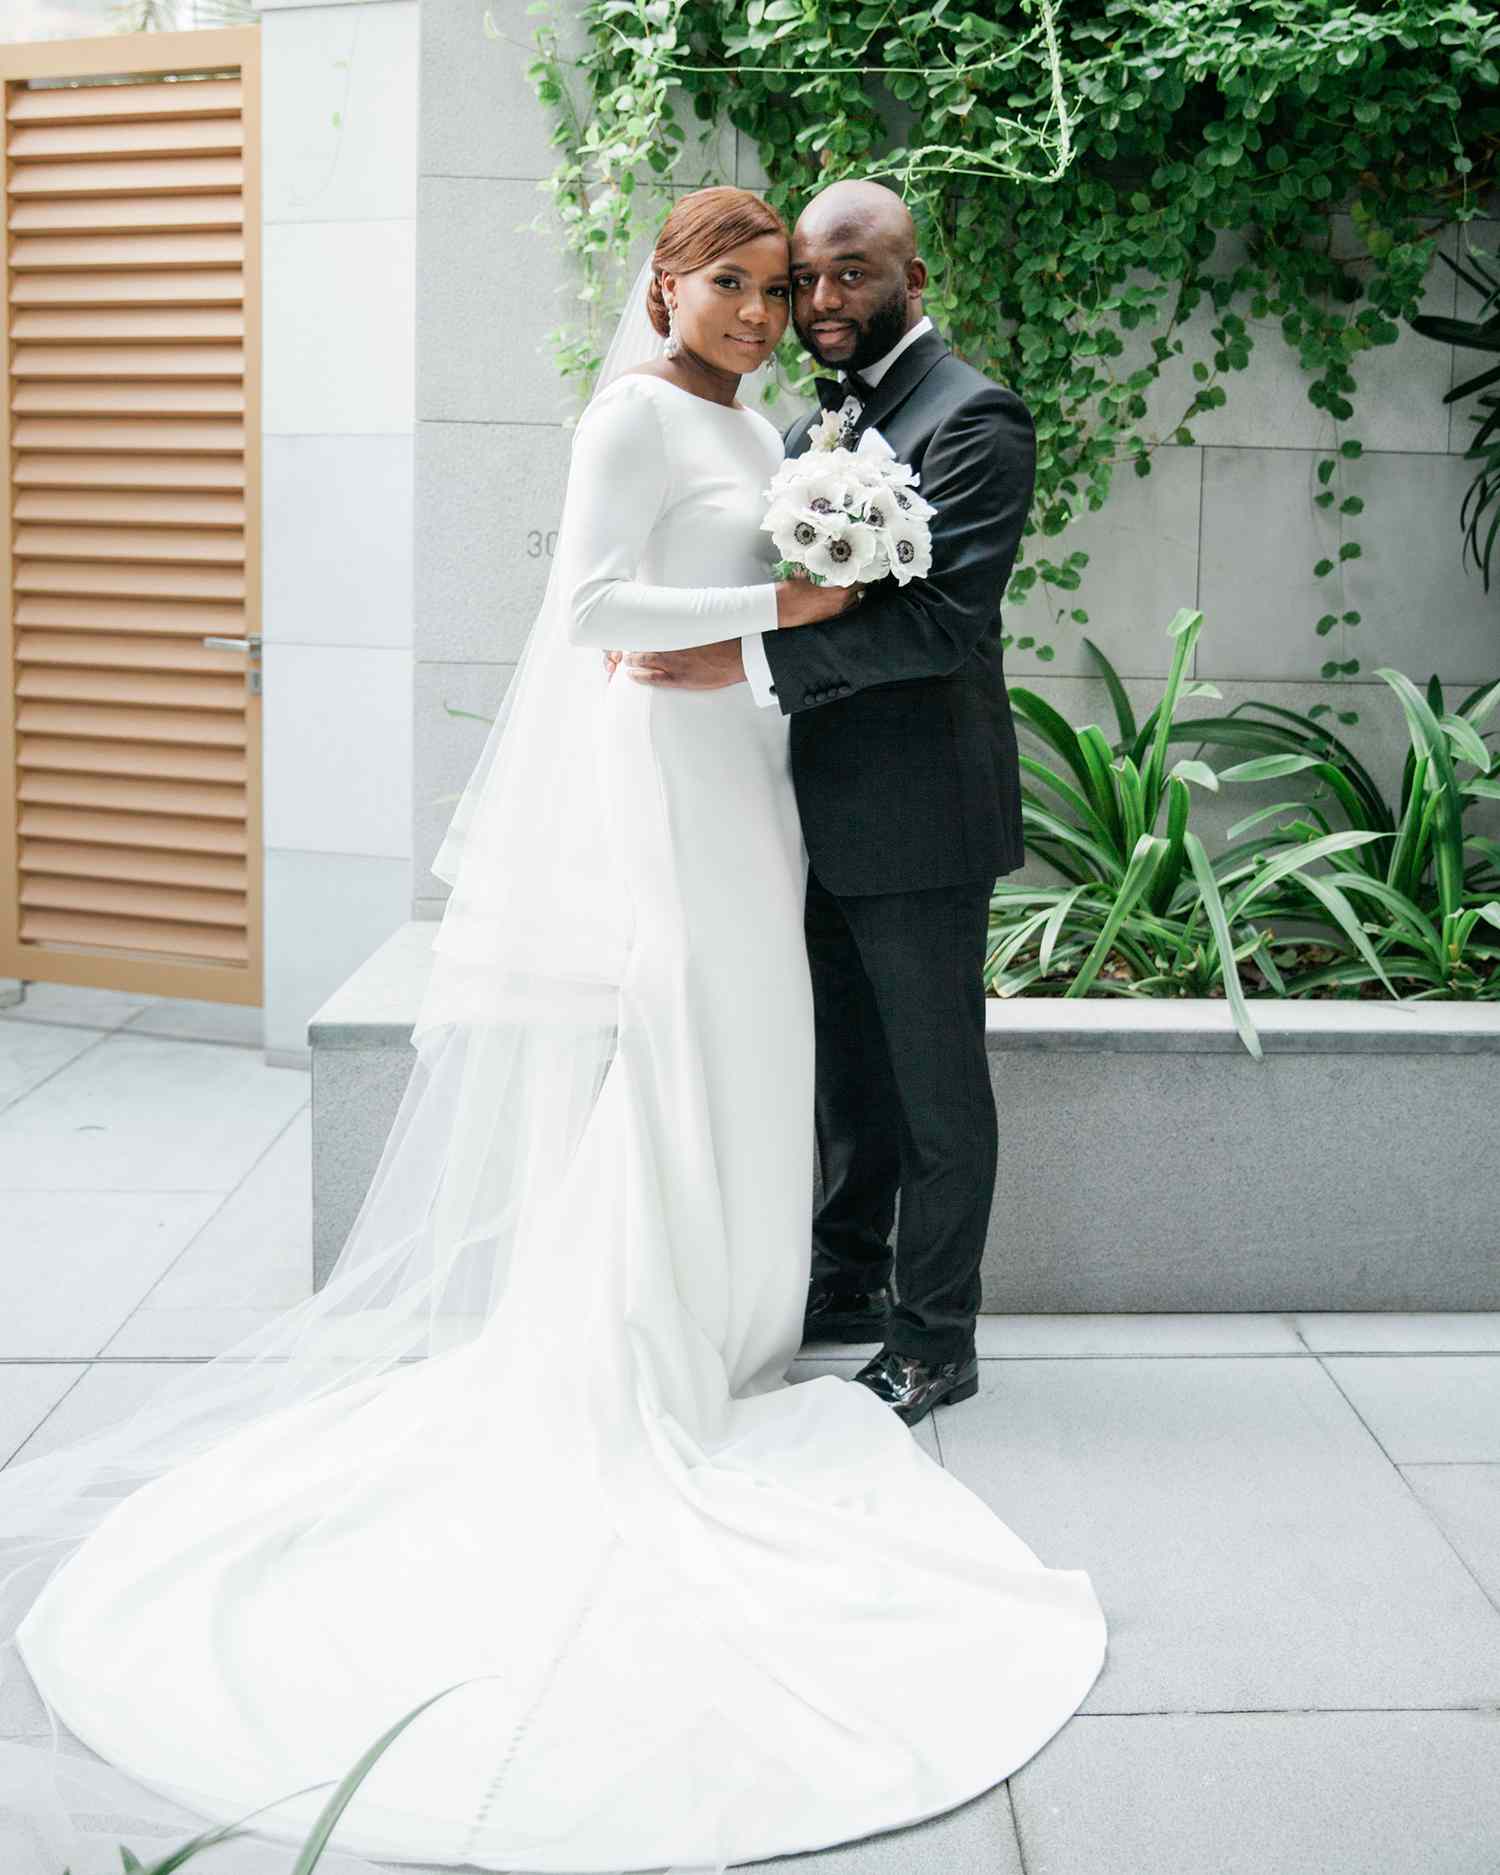 vanessa abidemi wedding couple in front of building and greenery